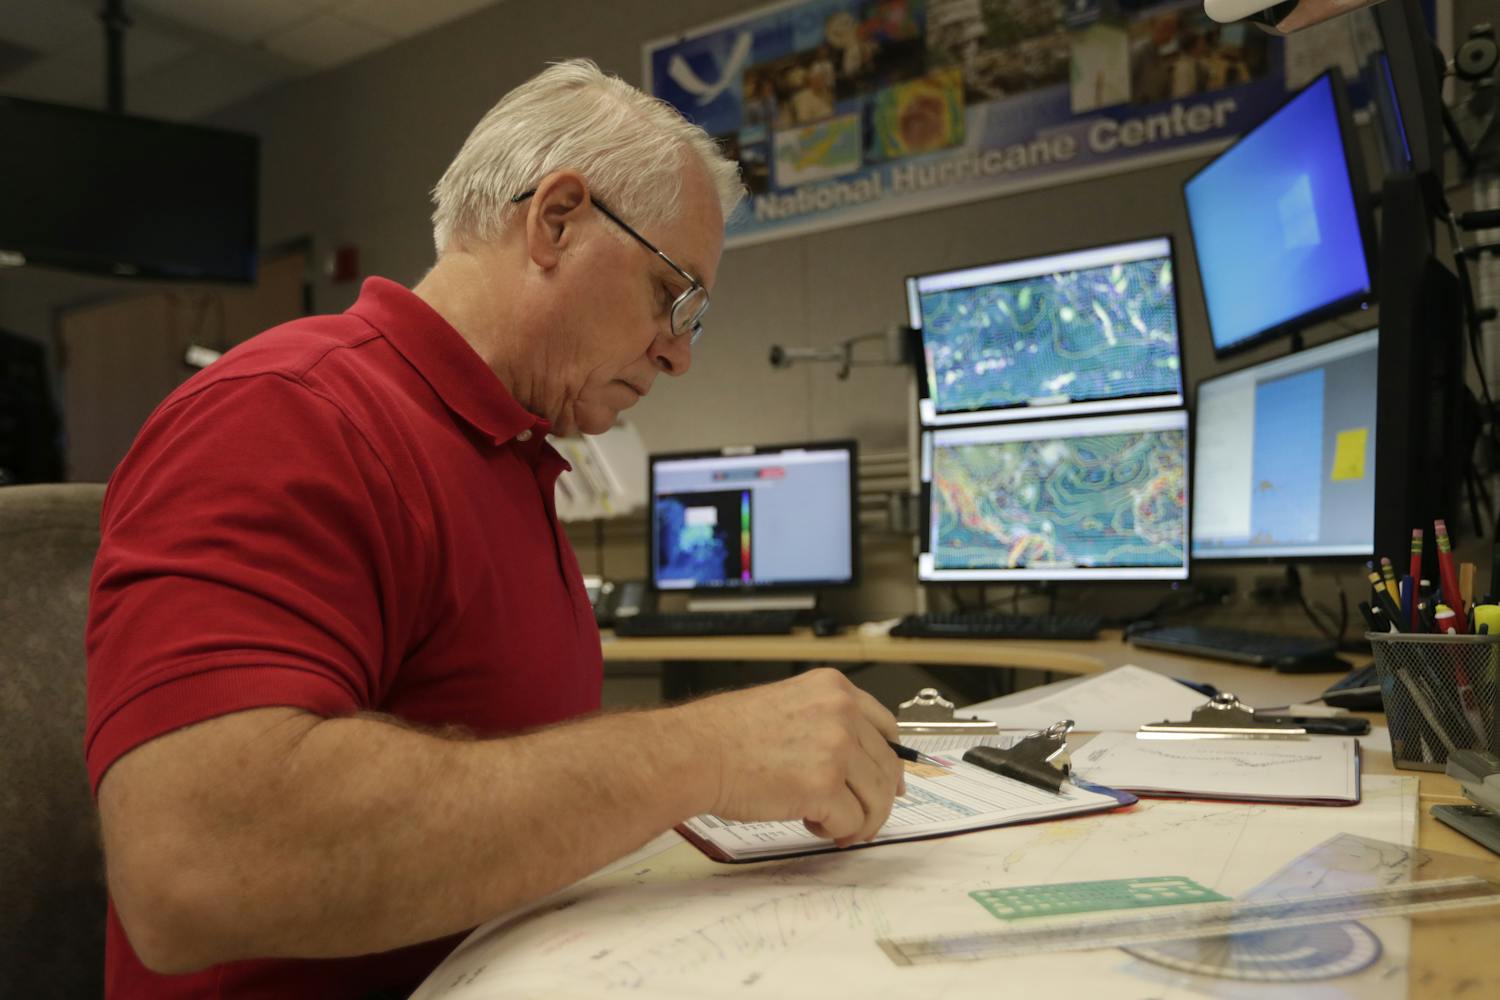 Senior hurricane specialist Stacy Stewart monitors the progress of Tropical Storm Dorian at the National Hurricane Center, Tuesday, in Miami.